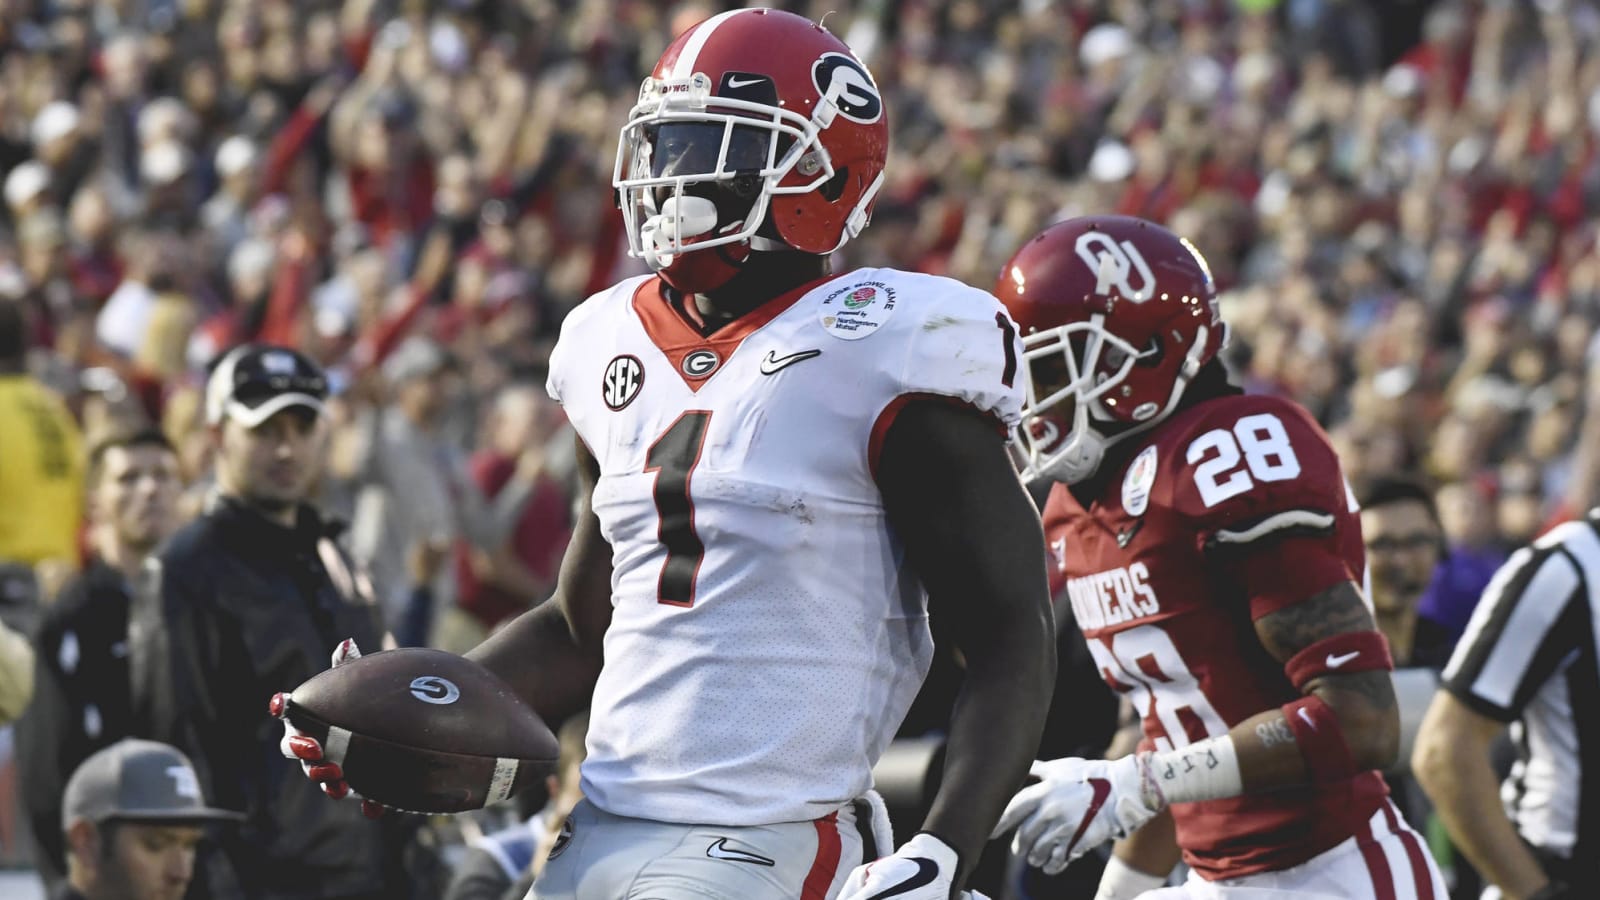 The 10 best moments from the College Football Playoff semifinals 